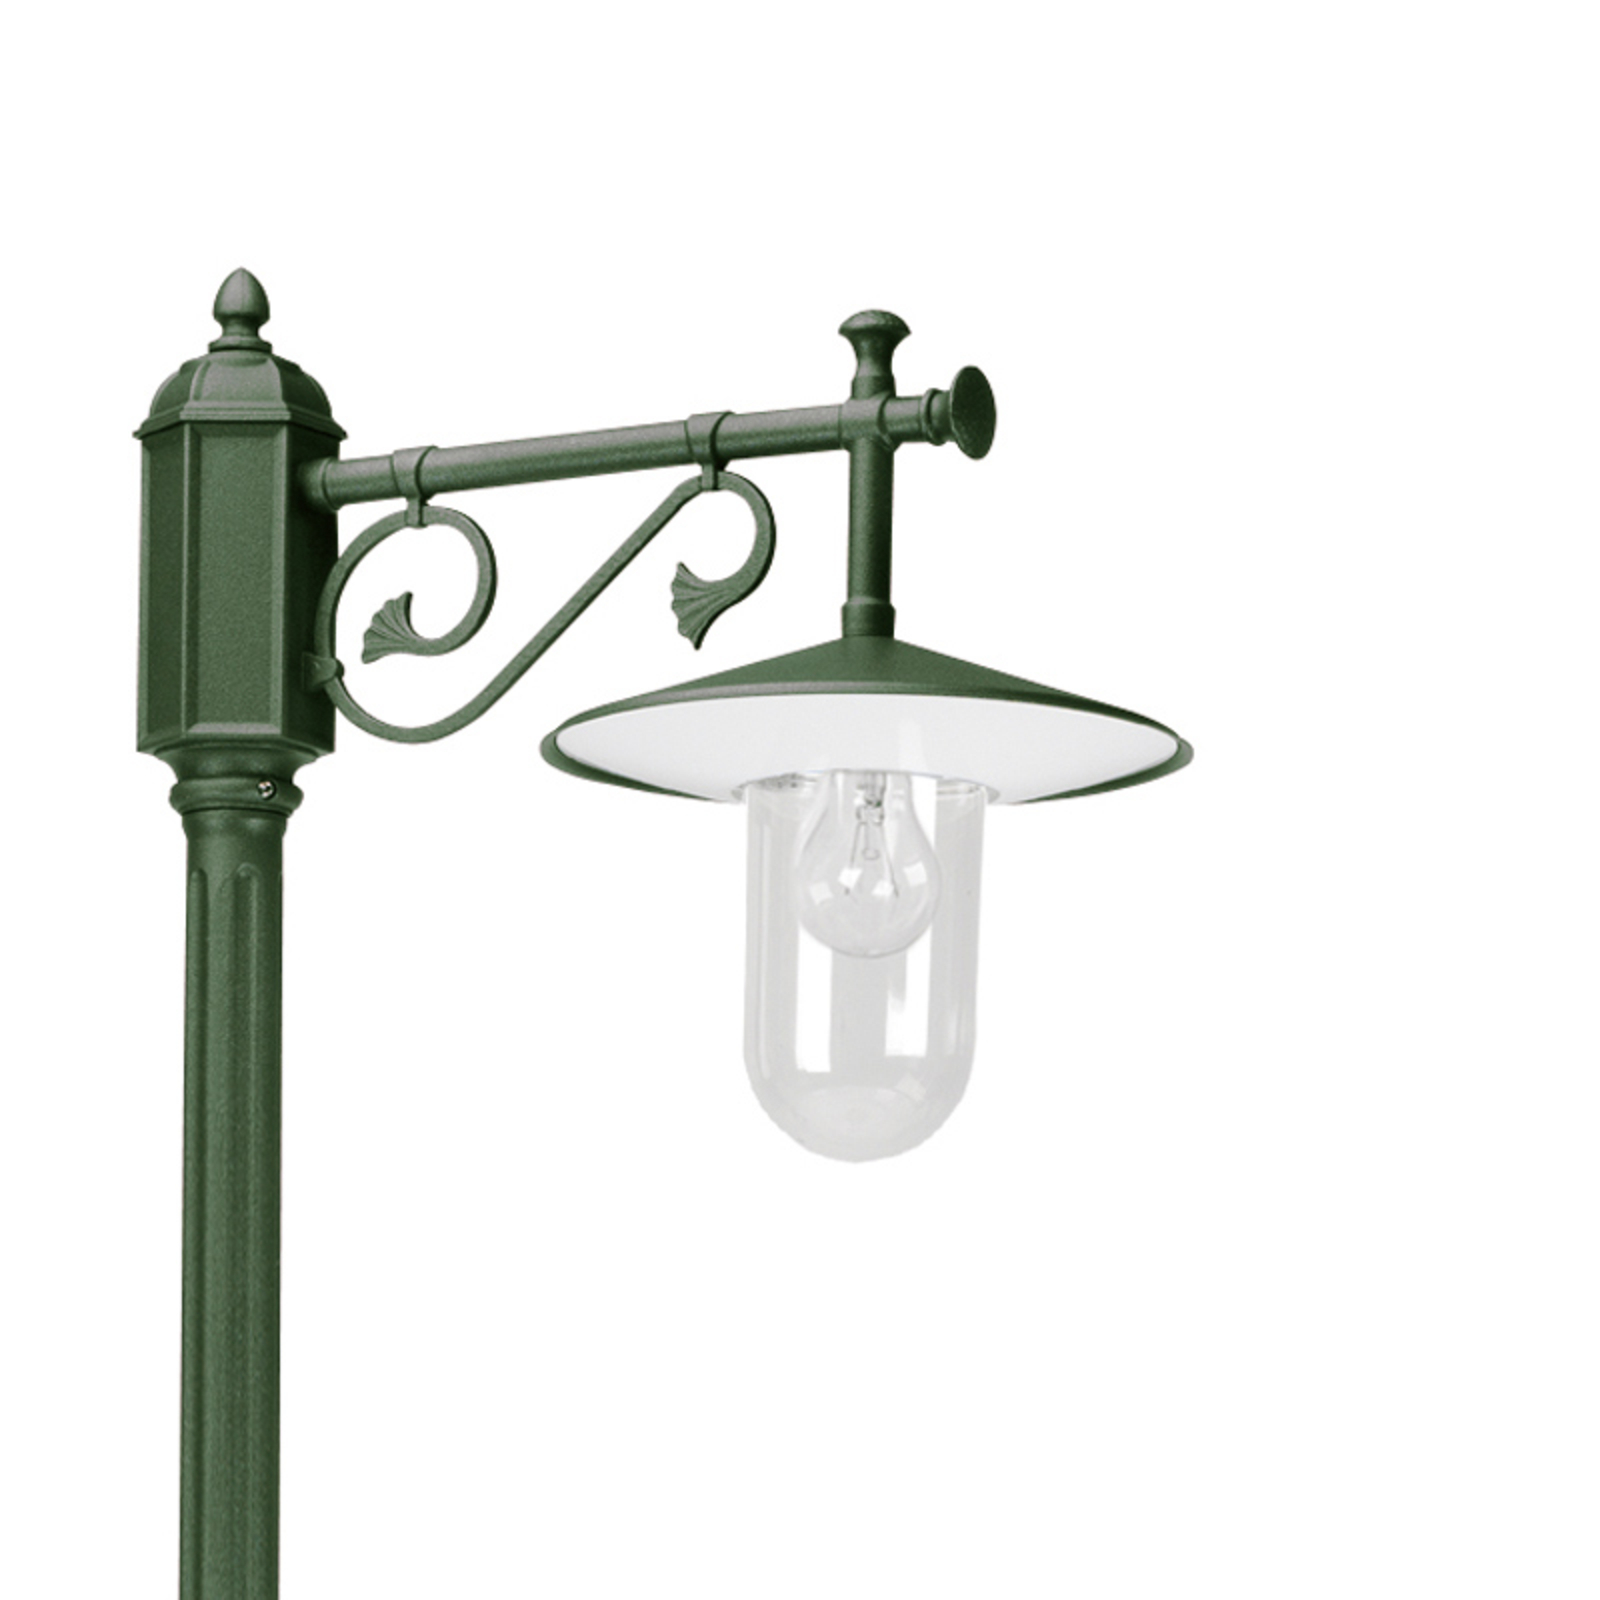 Louvre lamp post green/clear